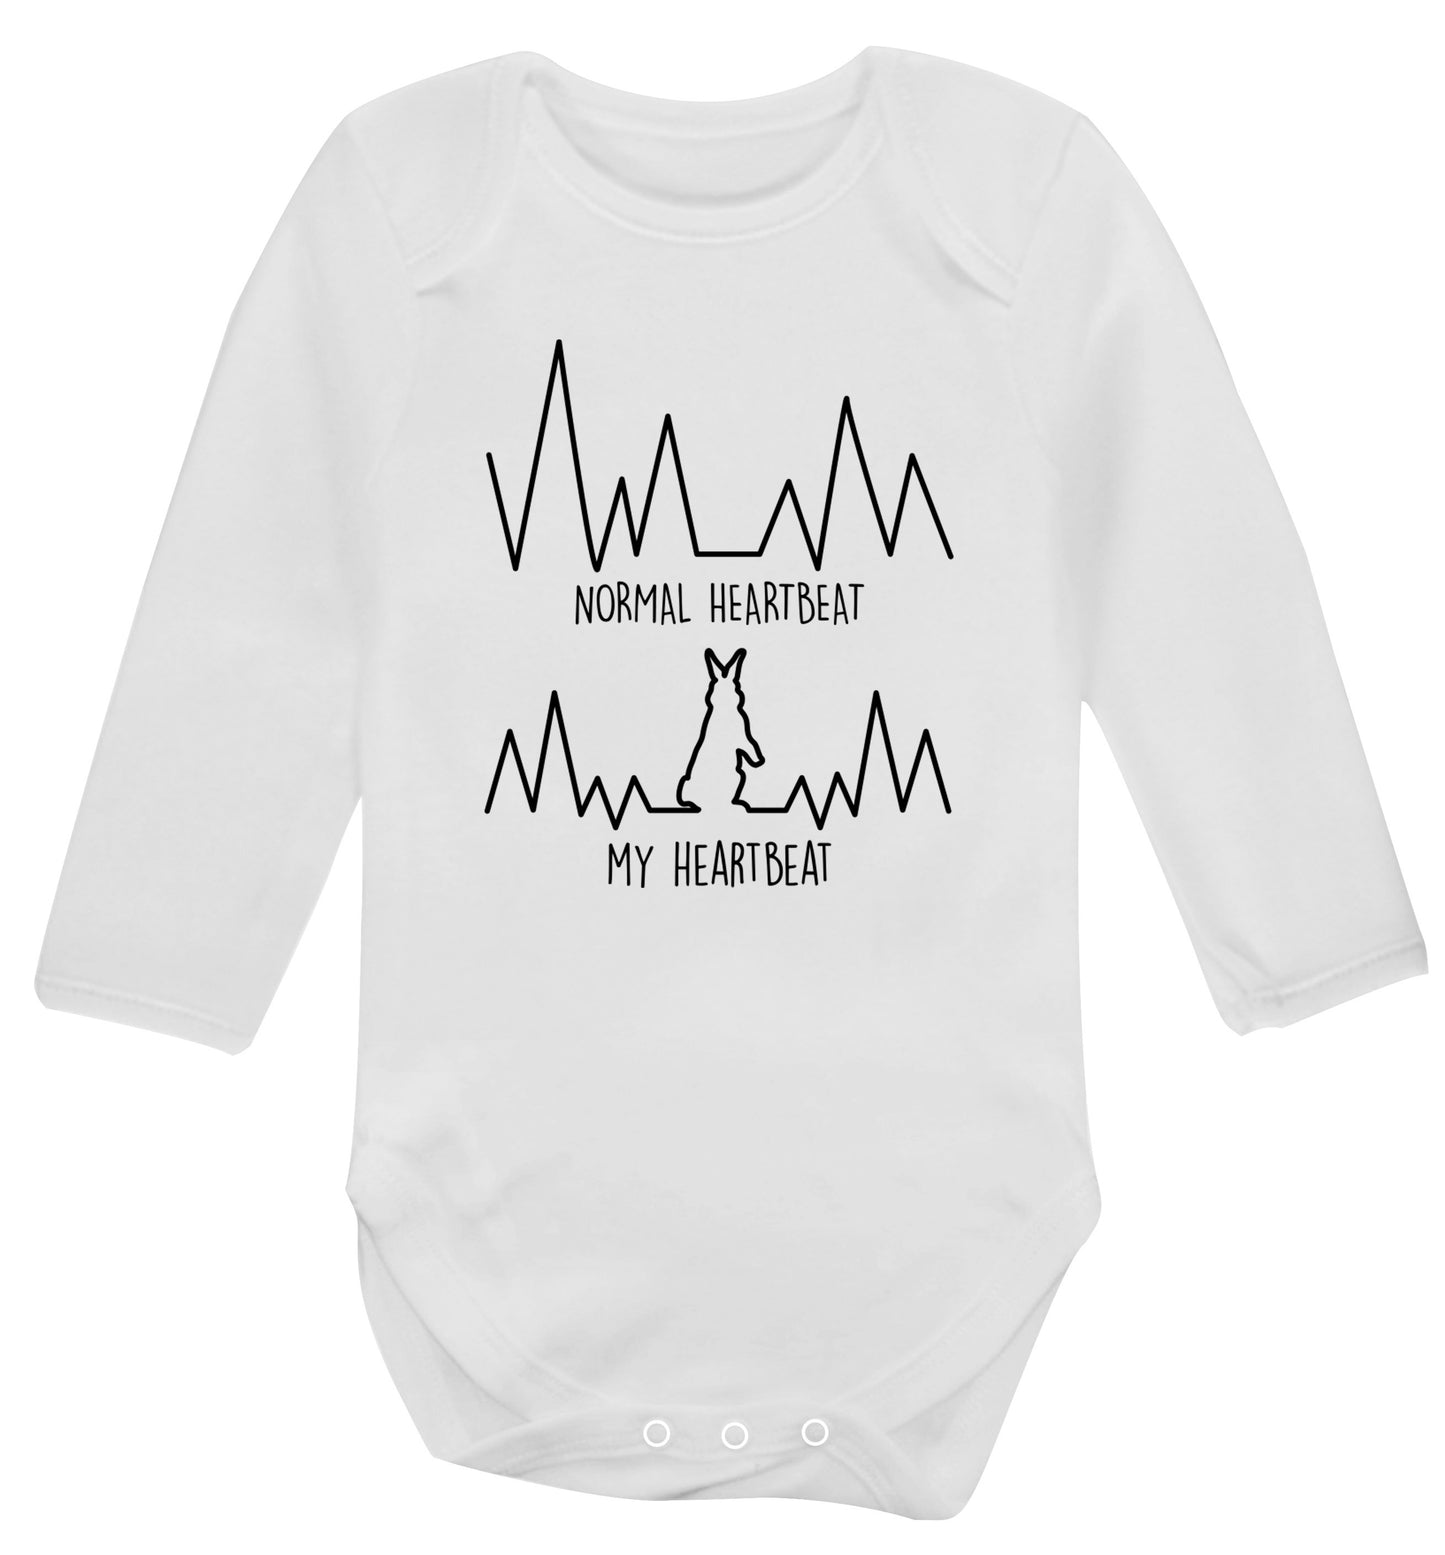 Normal heartbeat, my heartbeat rabbit lover Baby Vest long sleeved white 6-12 months